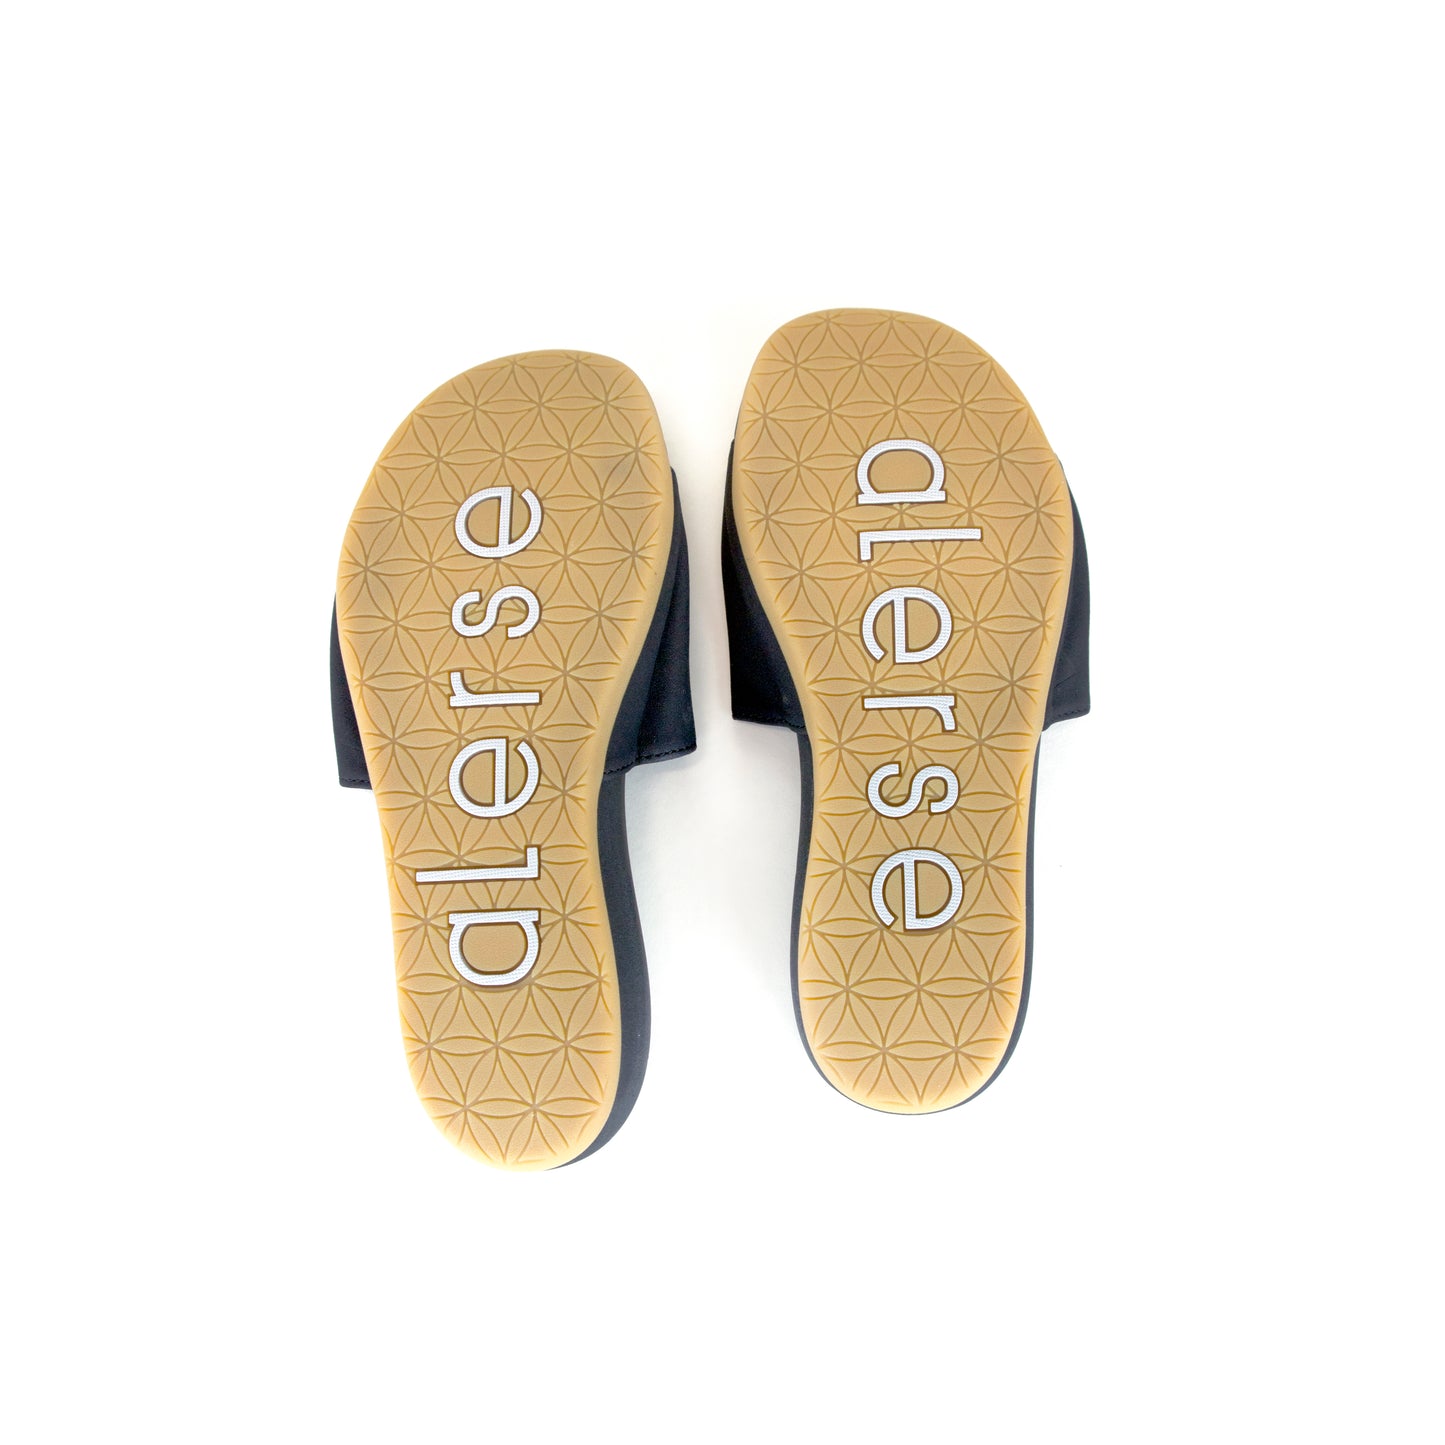 Yoga Sandals for Men and Women - Alerse